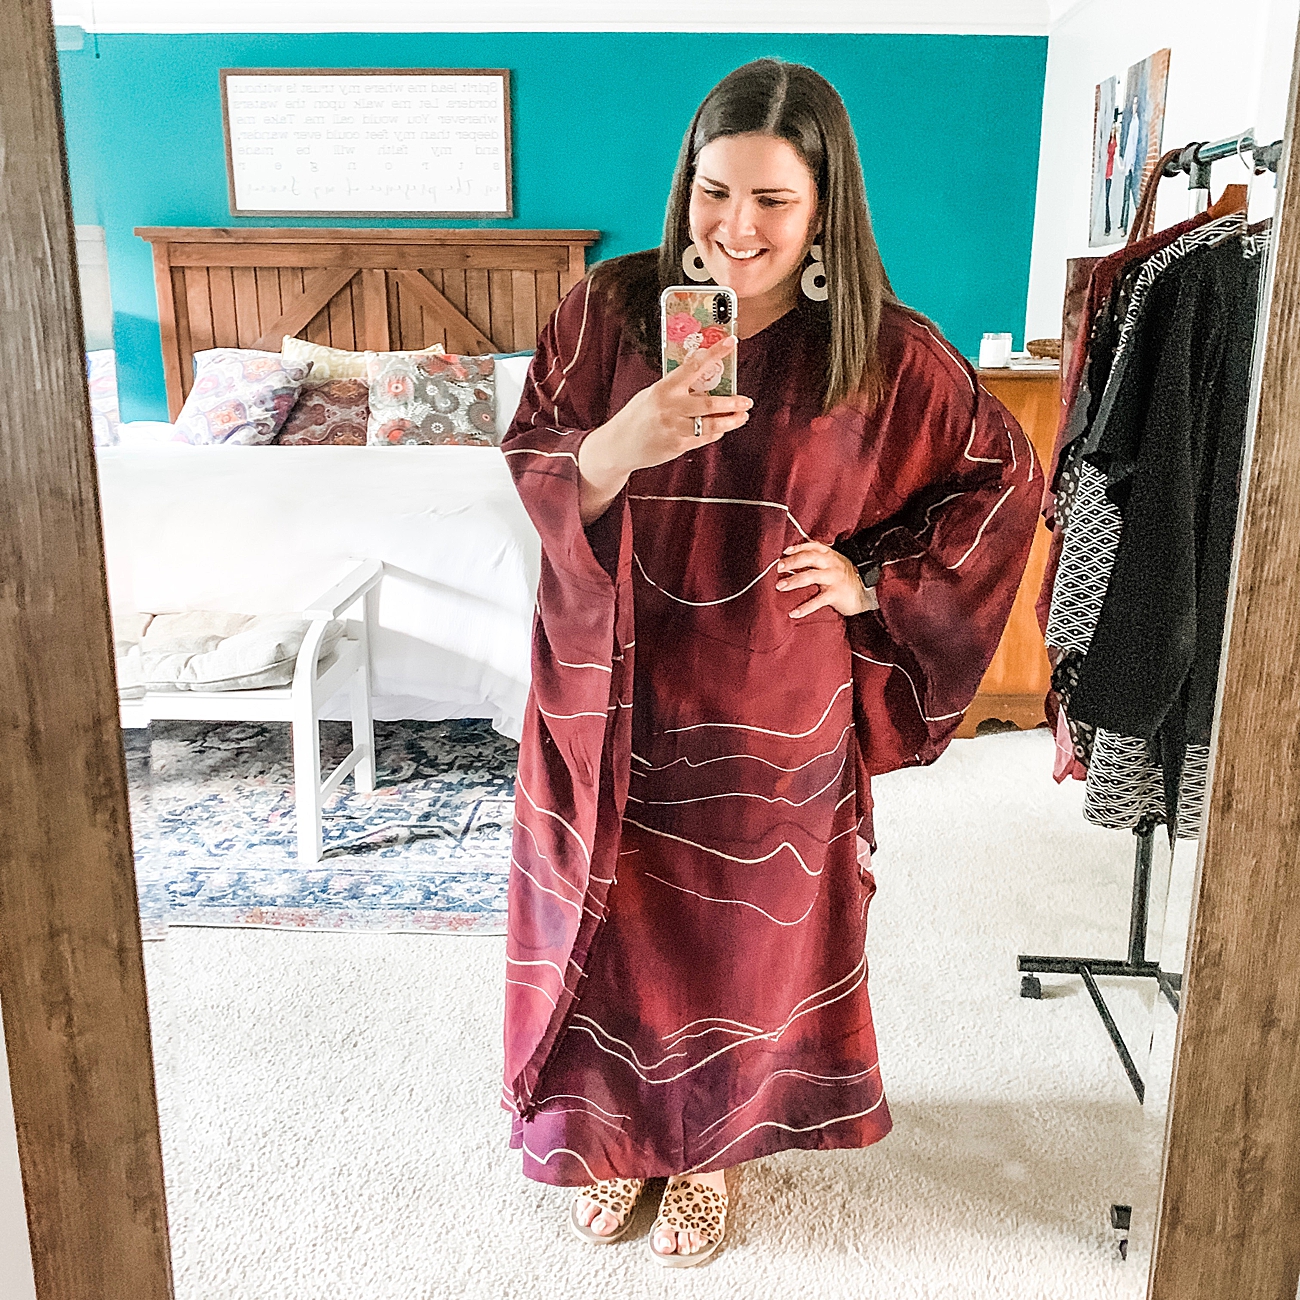 Sseko Designs Fall 2019 Sojourner Collection | Review + Try-On | Fair Trade Fashion #fairtradestyle #ethicalfashion http://www.ssekodesigns.com/mollystillman (4)